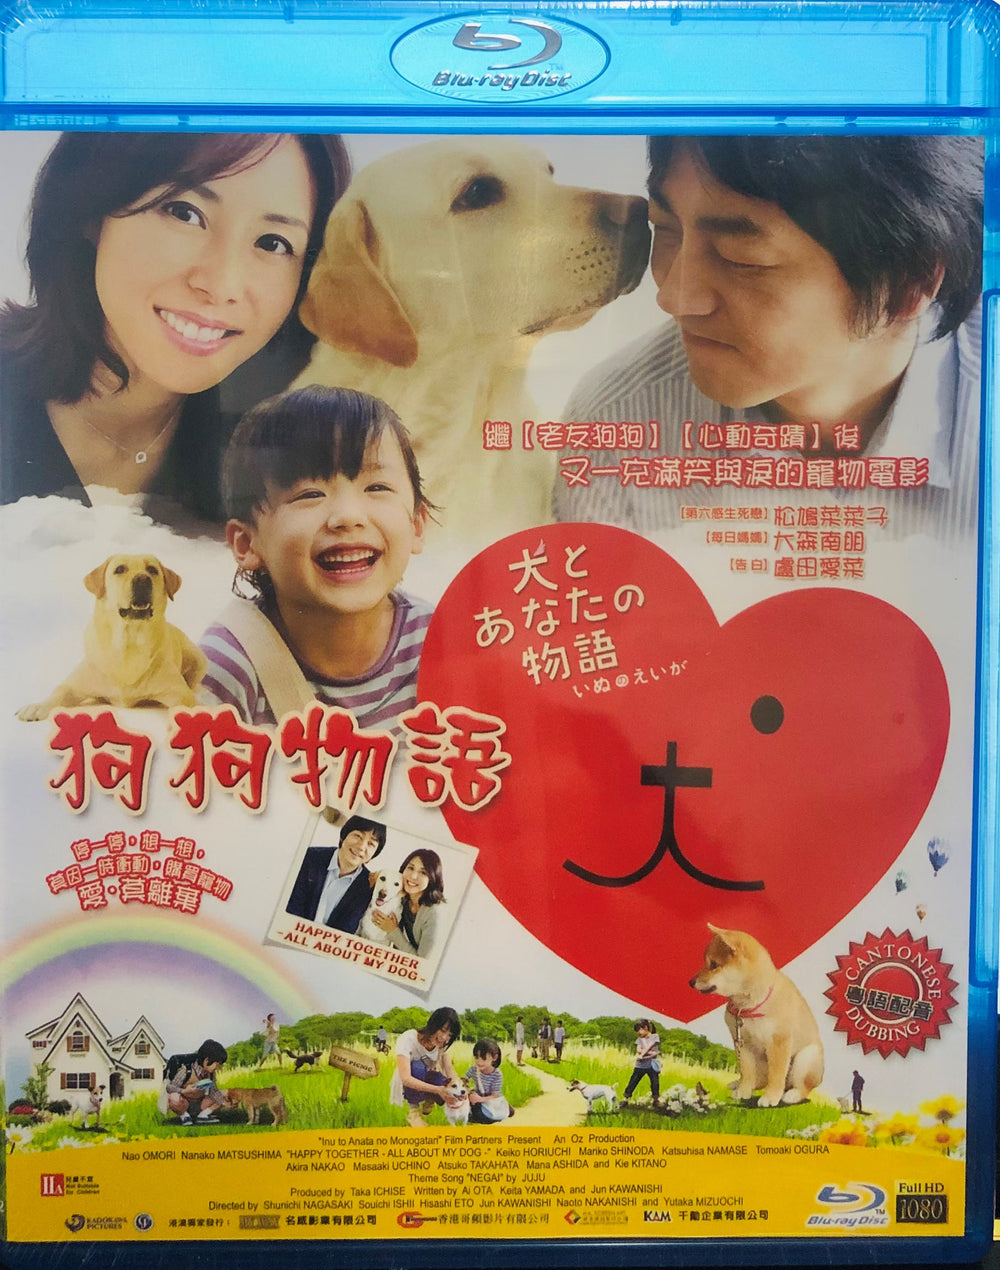 Happy Together - All About My Dog 狗狗物語 2011 (Japanese Movie) BLU-RAY with English Sub (Region A)